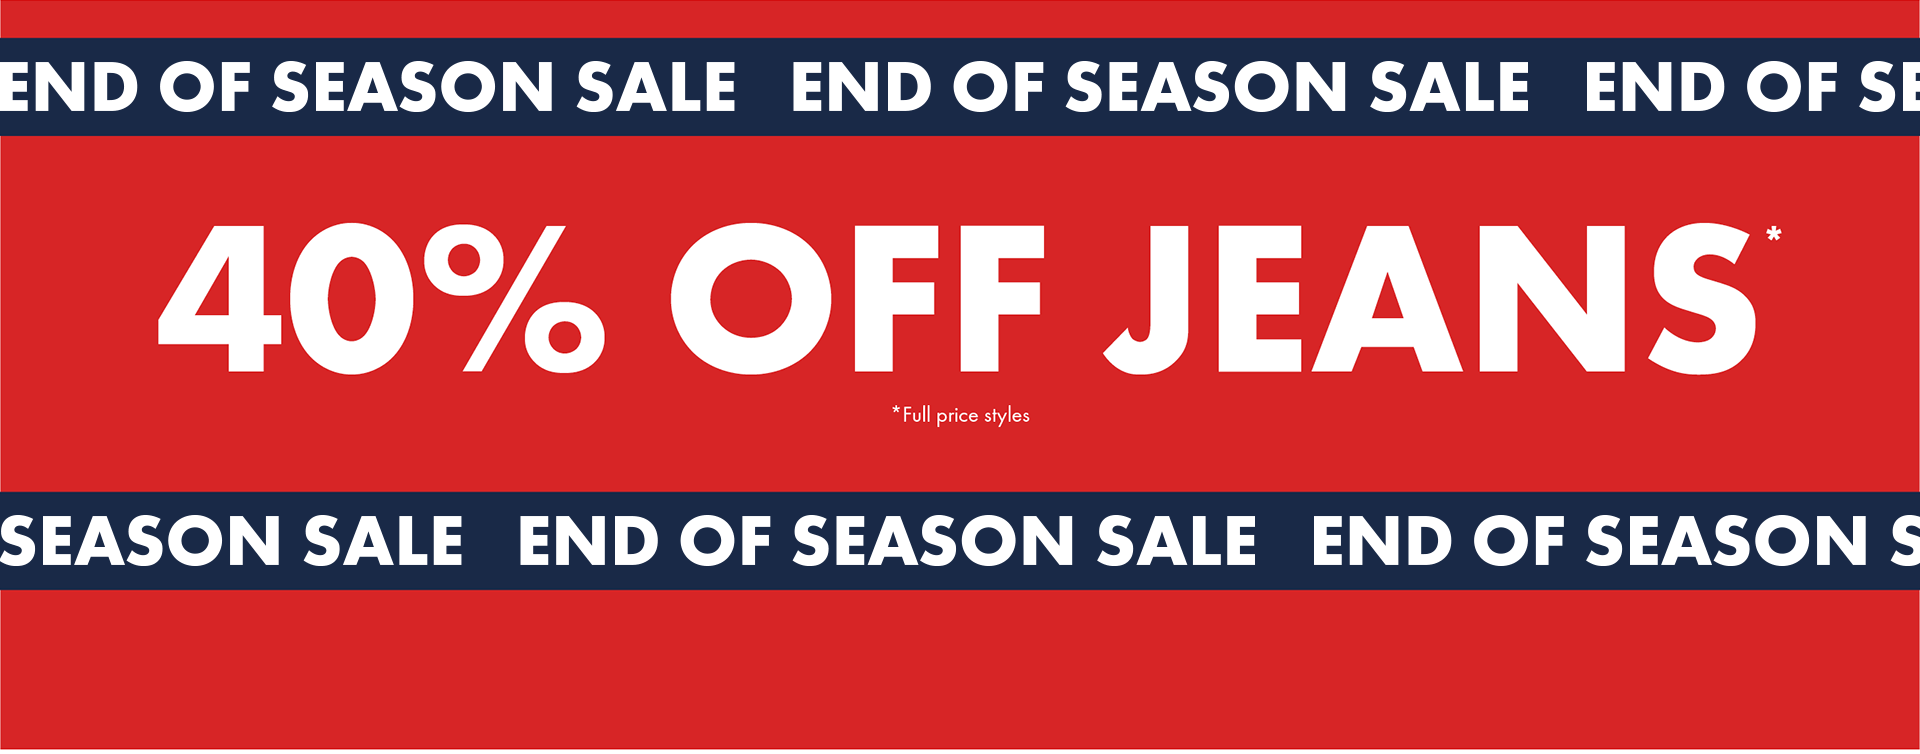 40% off Jeans*